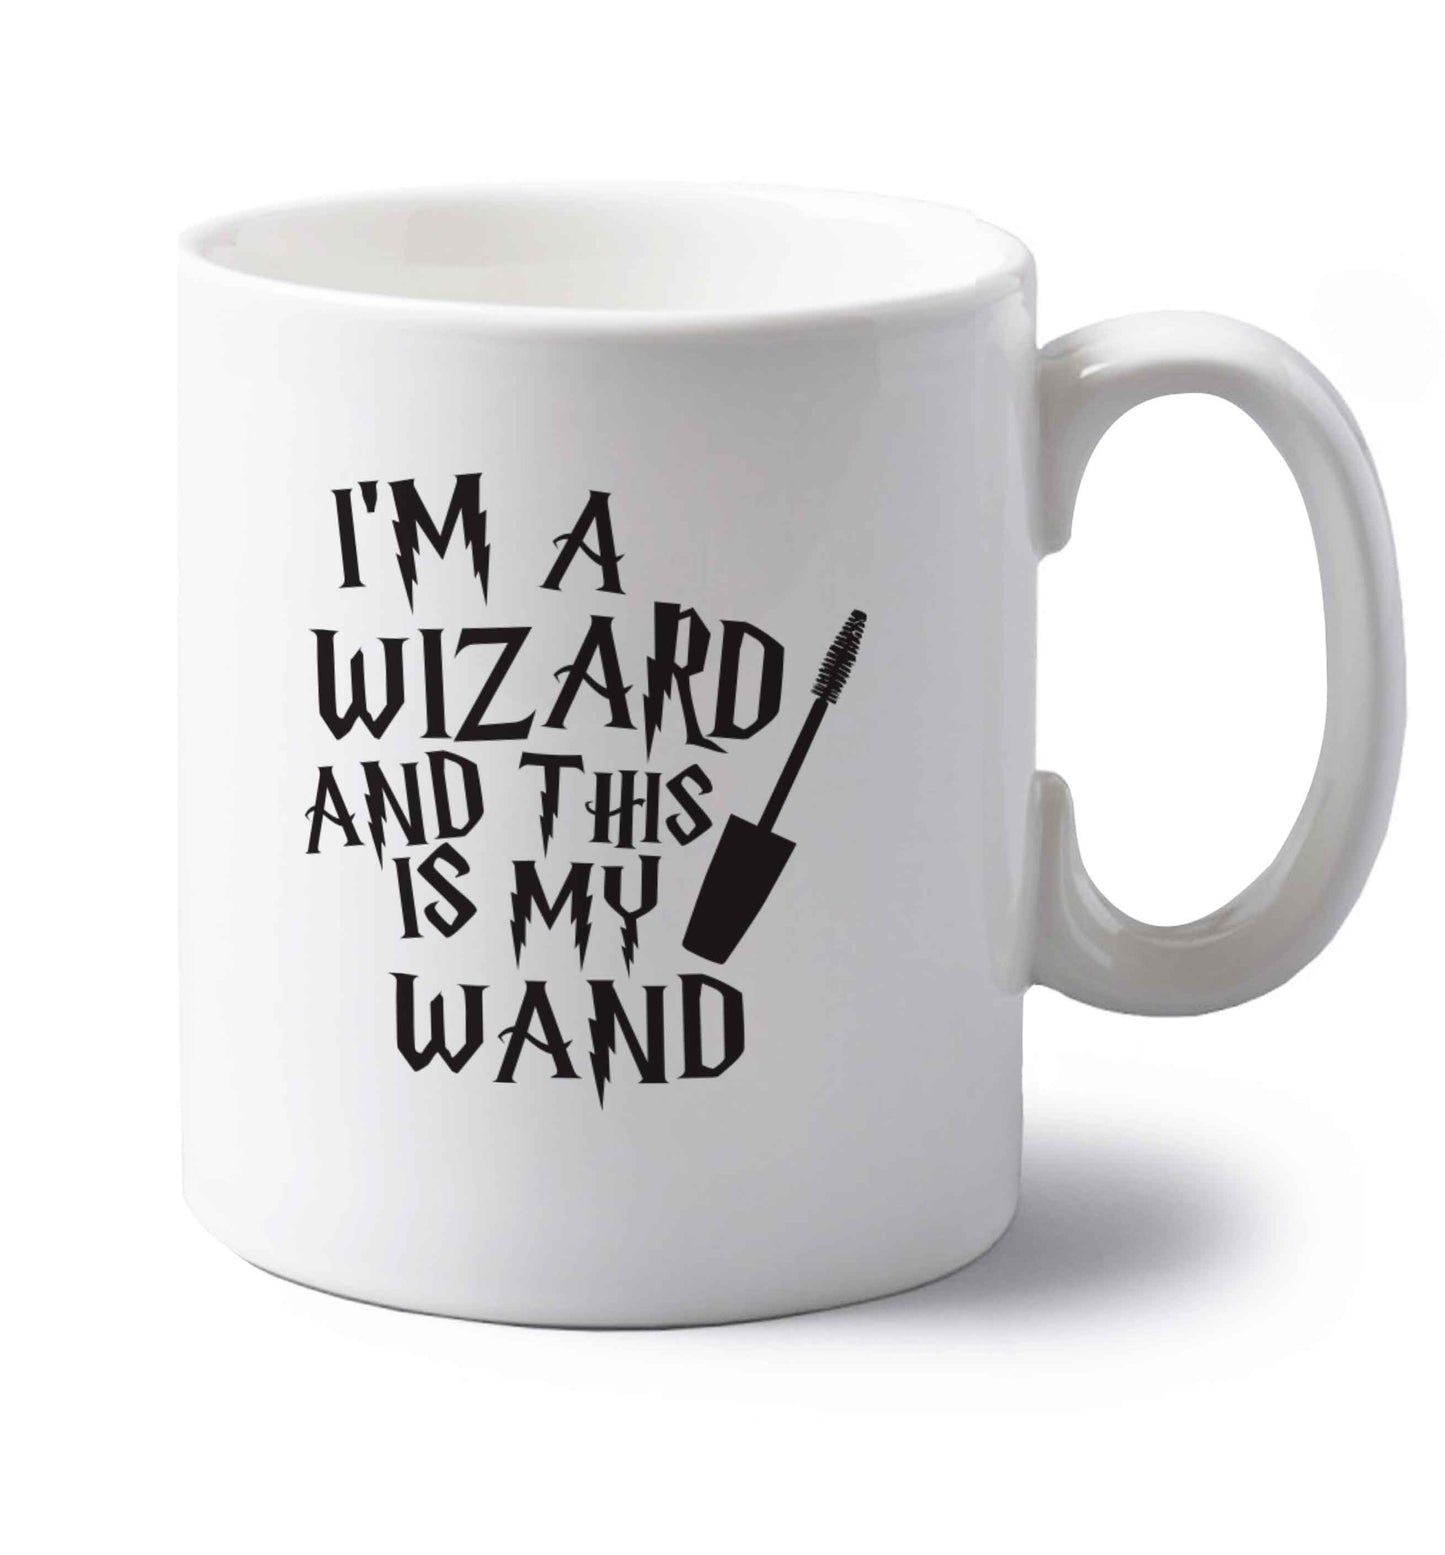 I'm a wizard and this is my wand left handed white ceramic mug 